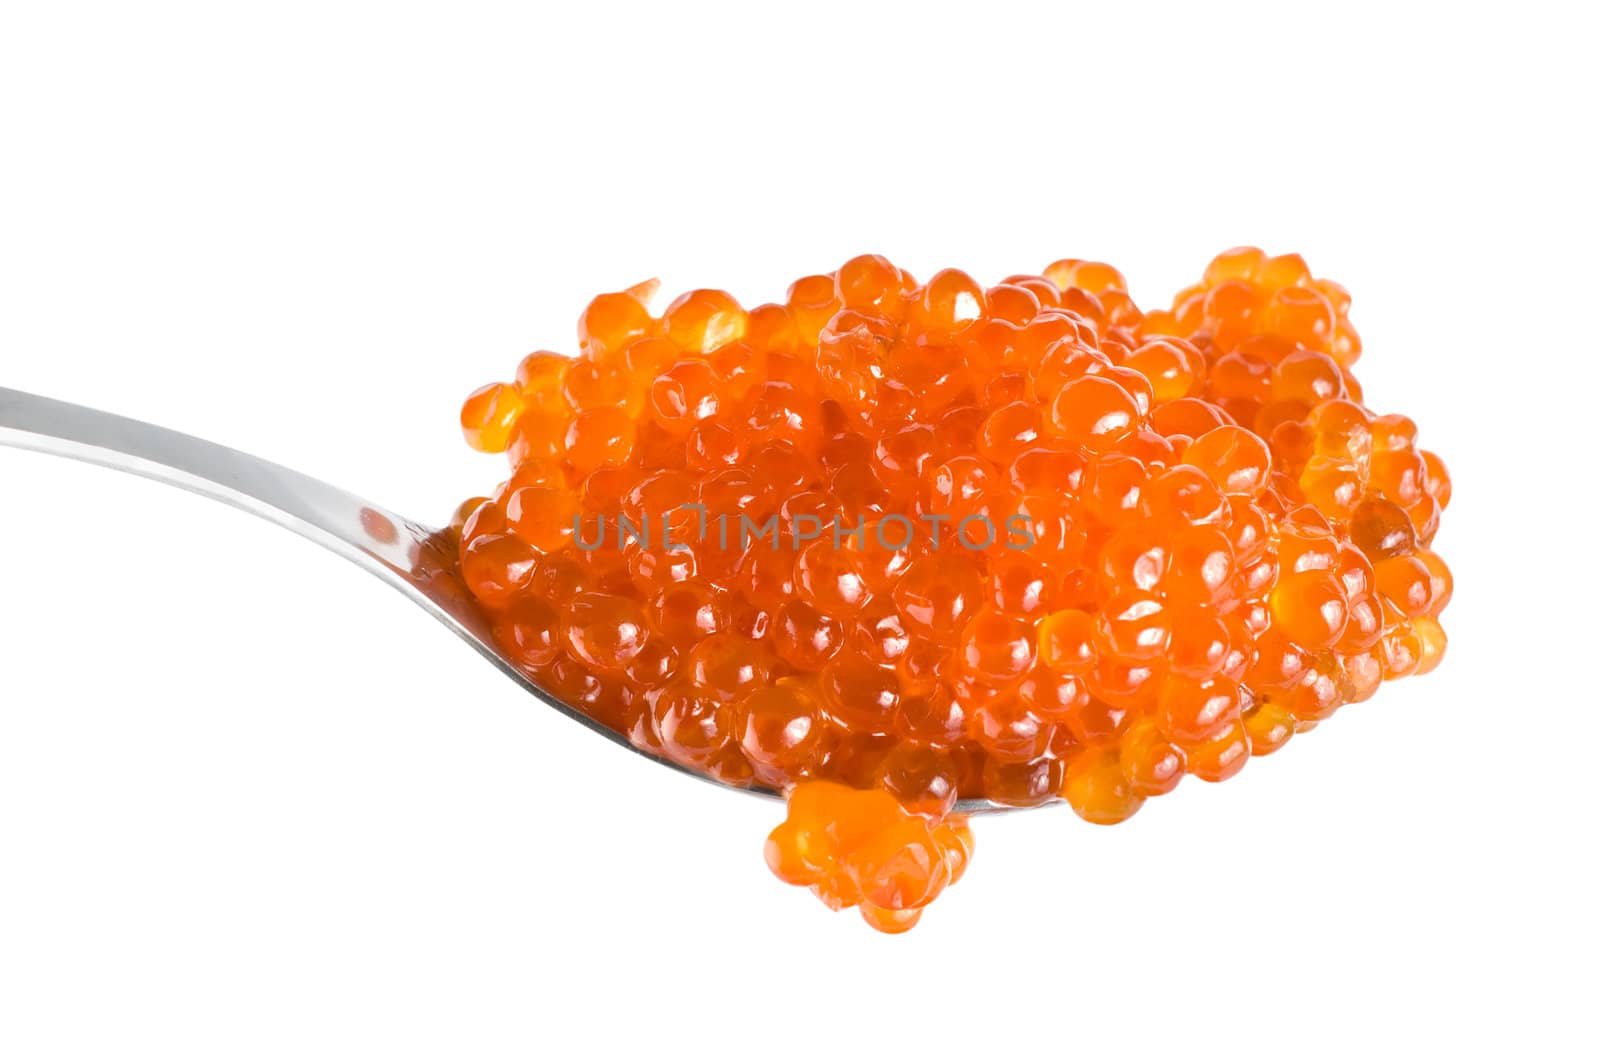 Red caviar in spoon by Givaga